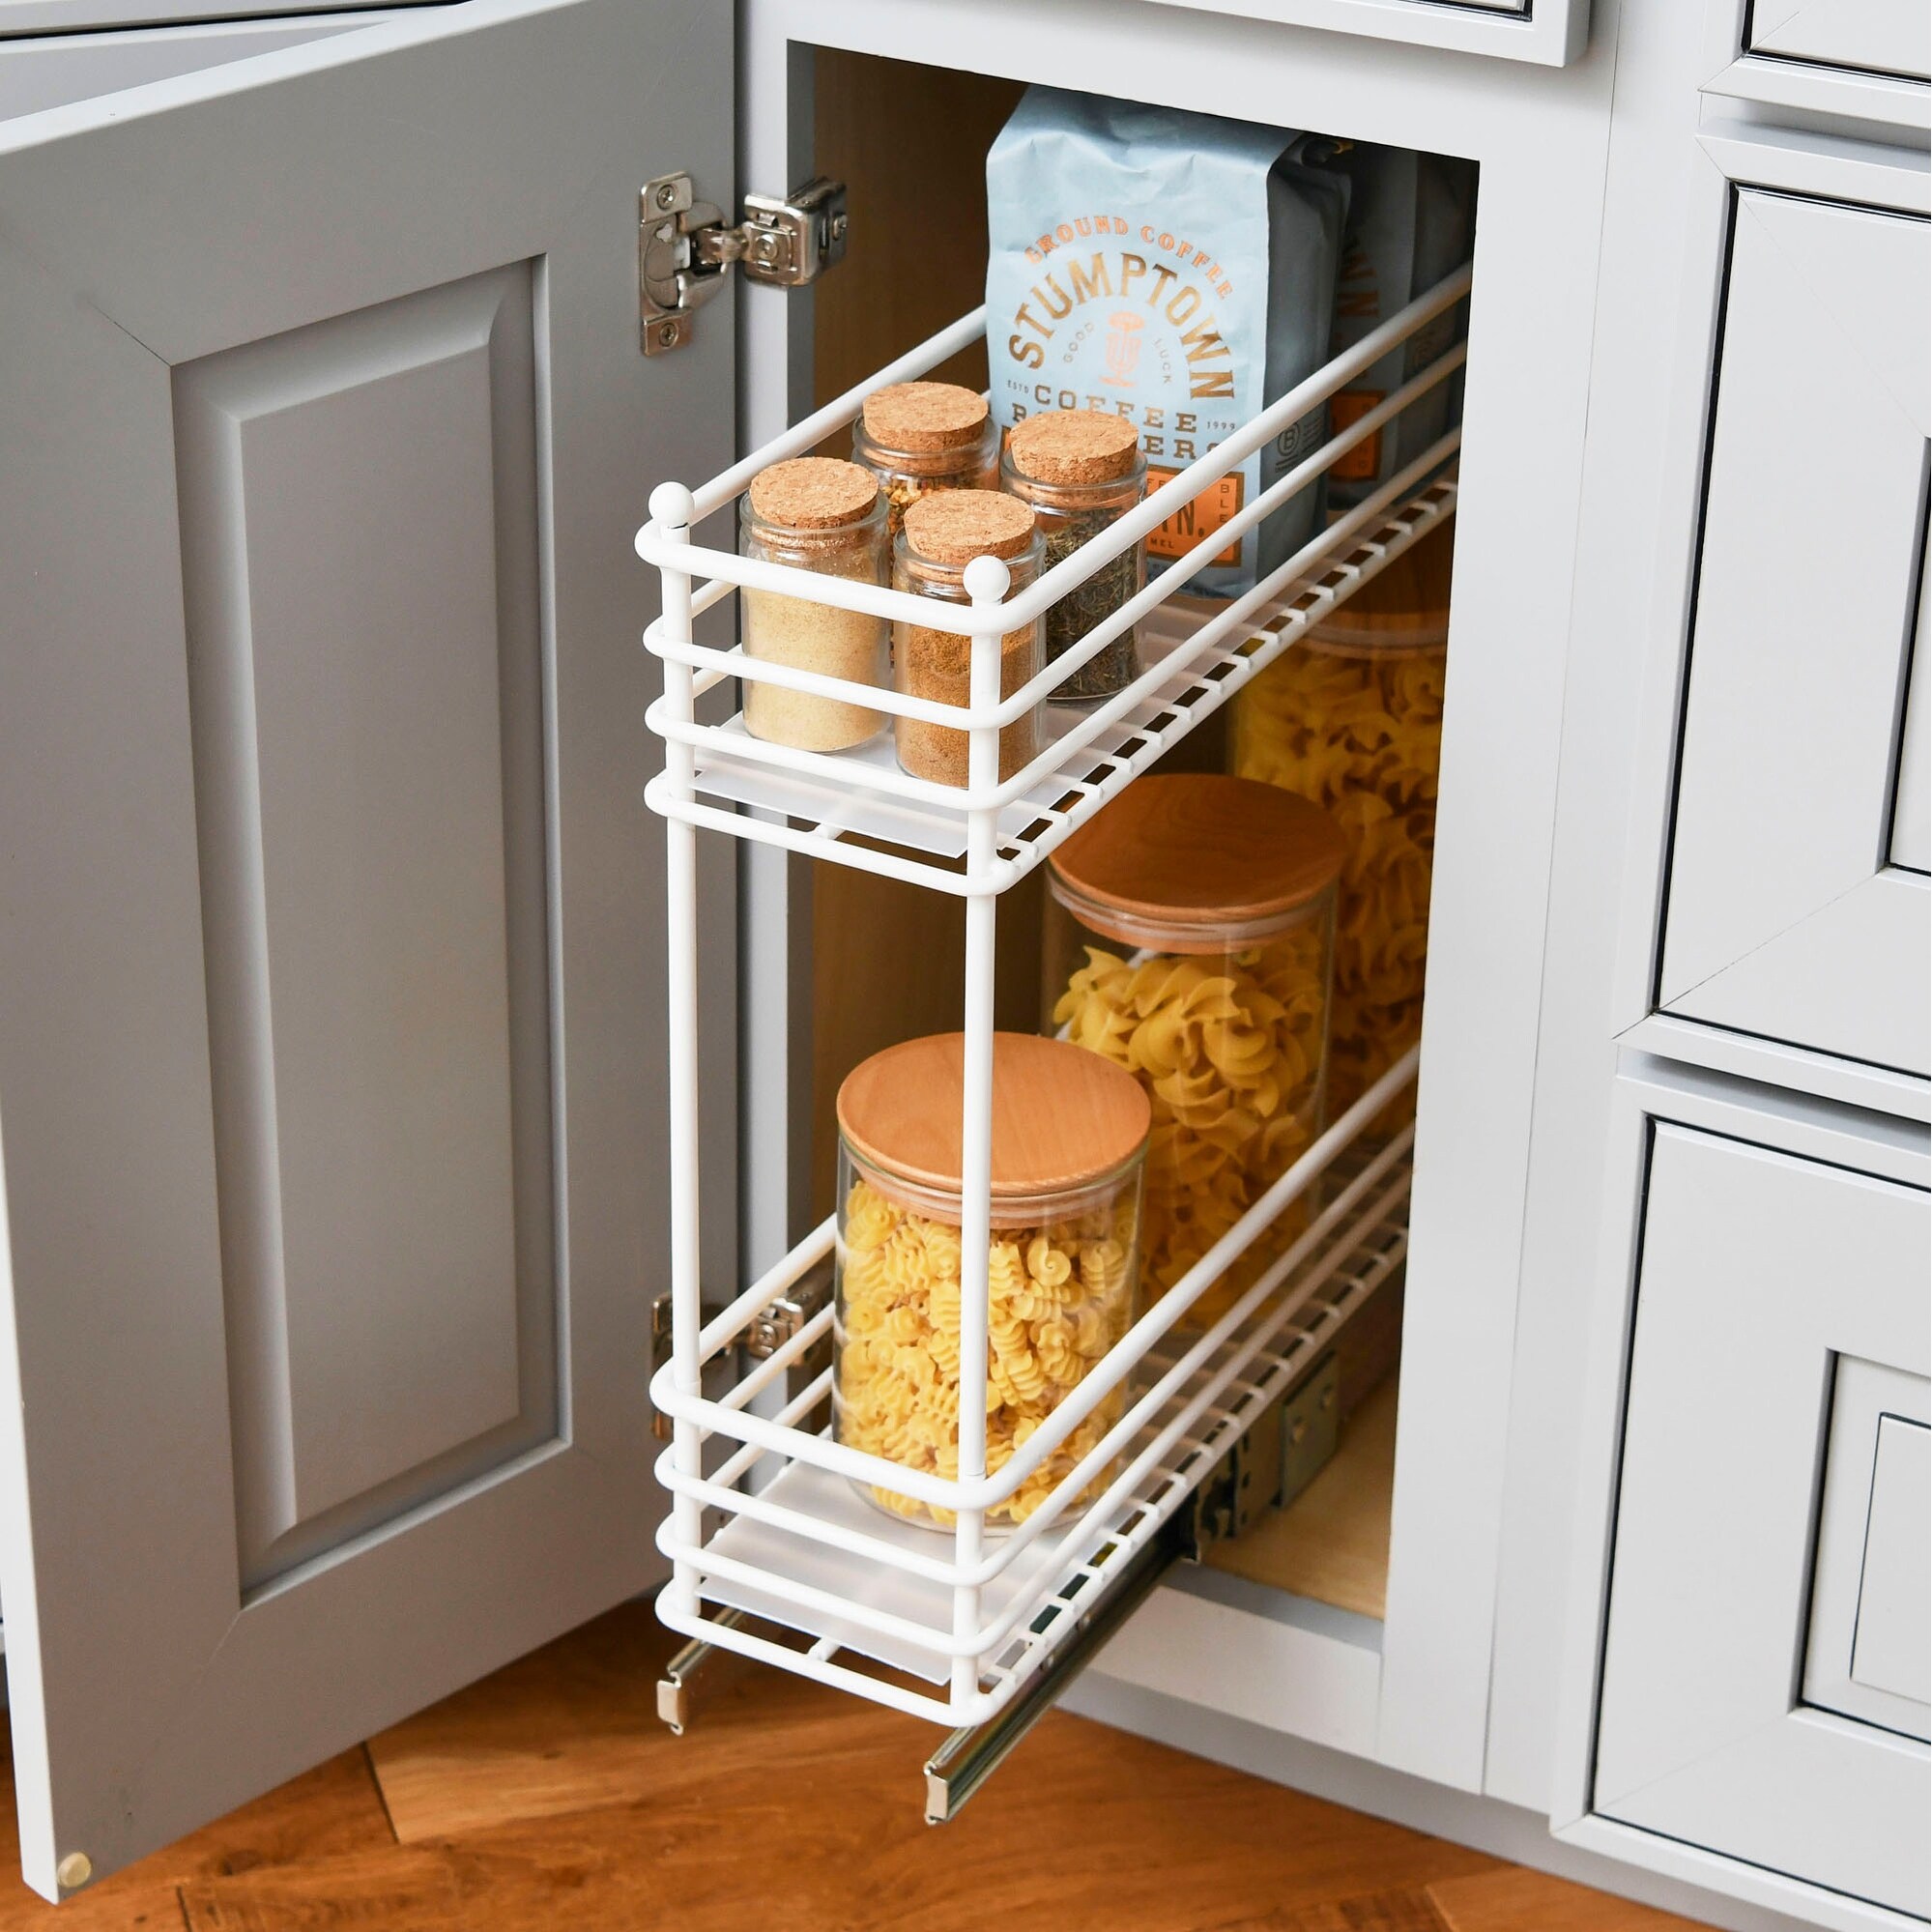 https://ak1.ostkcdn.com/images/products/is/images/direct/669b1b5a74cebcc46952c3b6e3cdfd1b255398f5/Narrow-Two-Sliding-Cabinet-Organizer%2C-Great-for-Slim-Cabinets-in-Kitchen.jpg